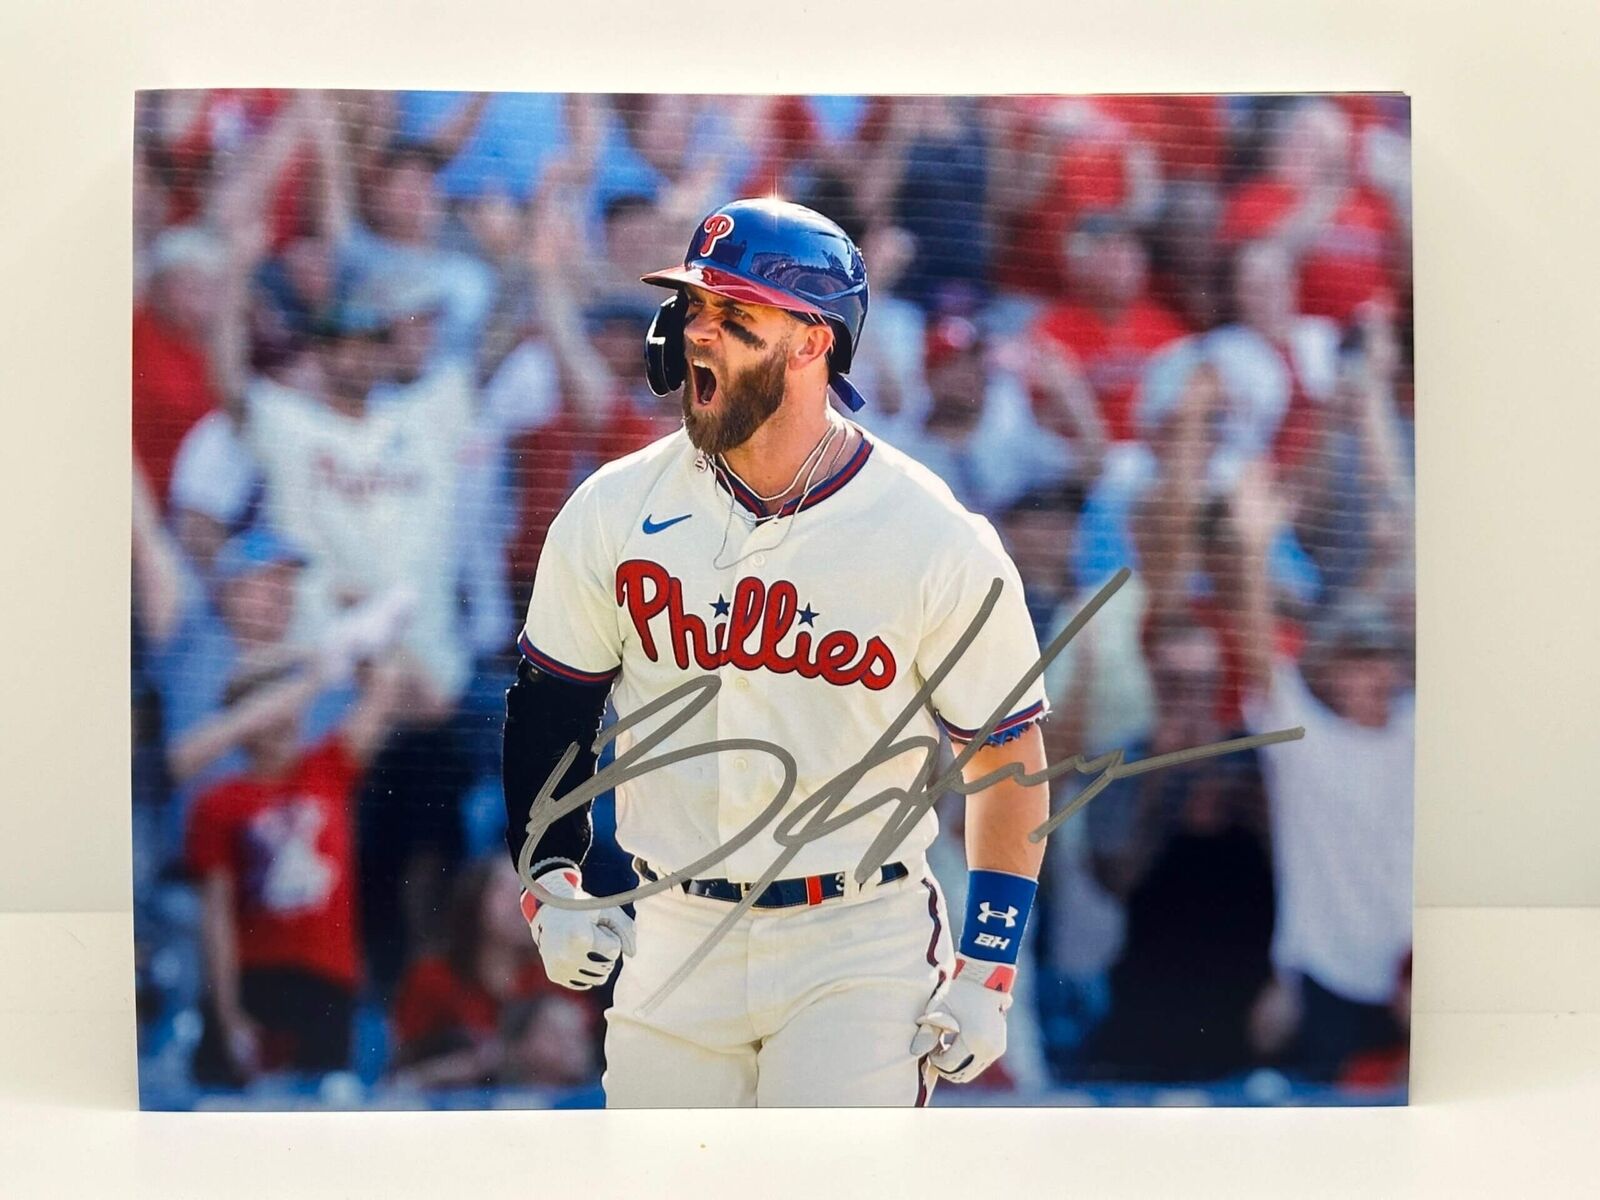 Bryce Harper Homerun Phillies Signed Autographed Photo Authentic 8X10 COA